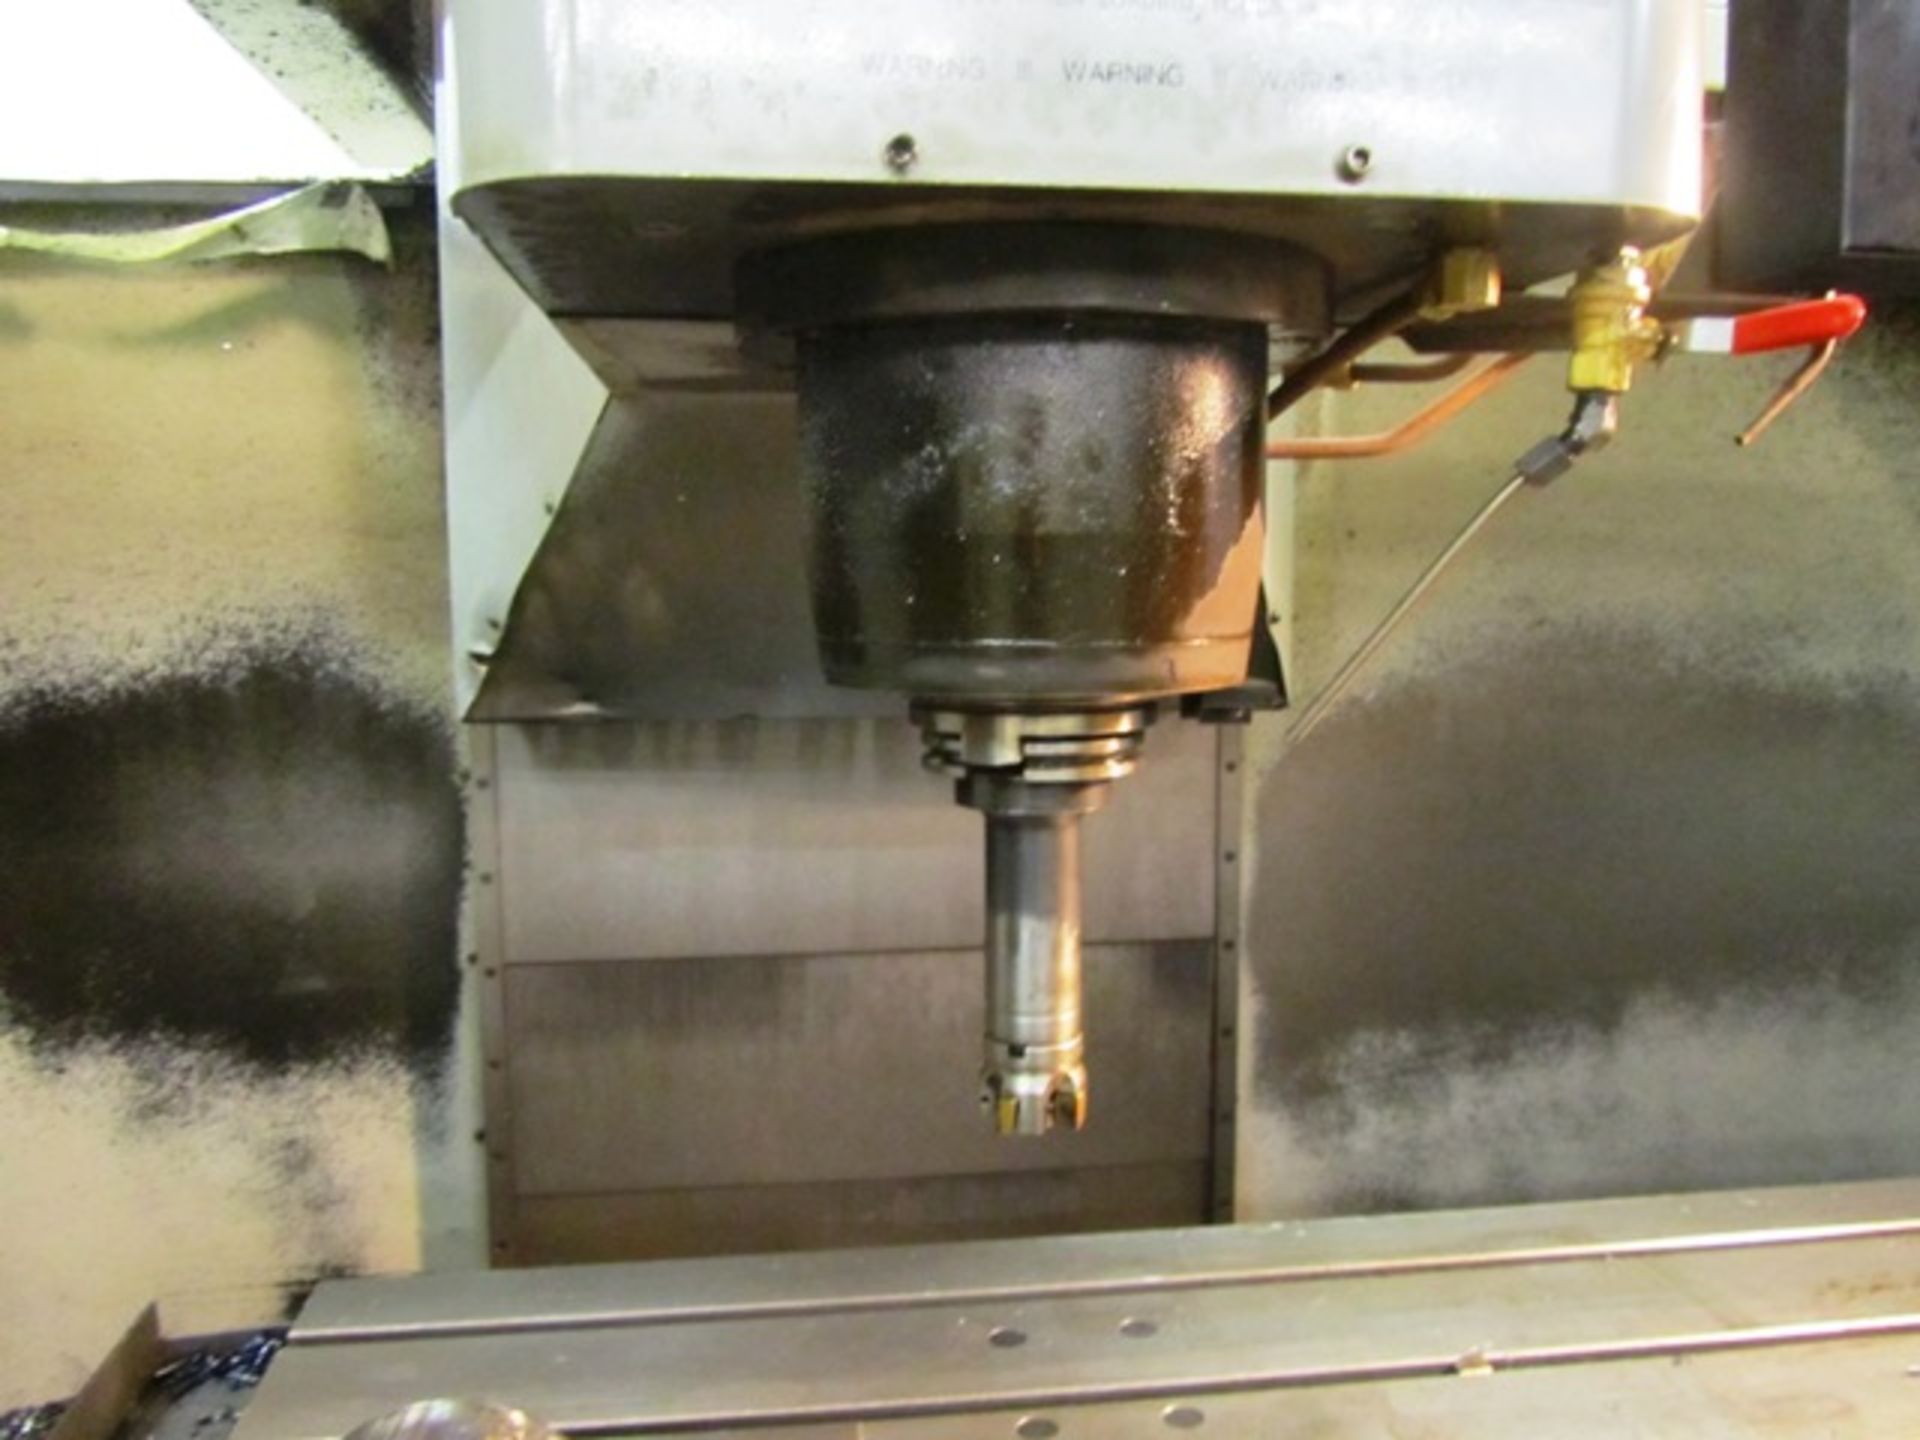 Haas VF8 CNC Vertical Machining Center with 36'' x 64'' Table, #50 Taper Spindle Speeds to 5000 RPM, - Image 4 of 6